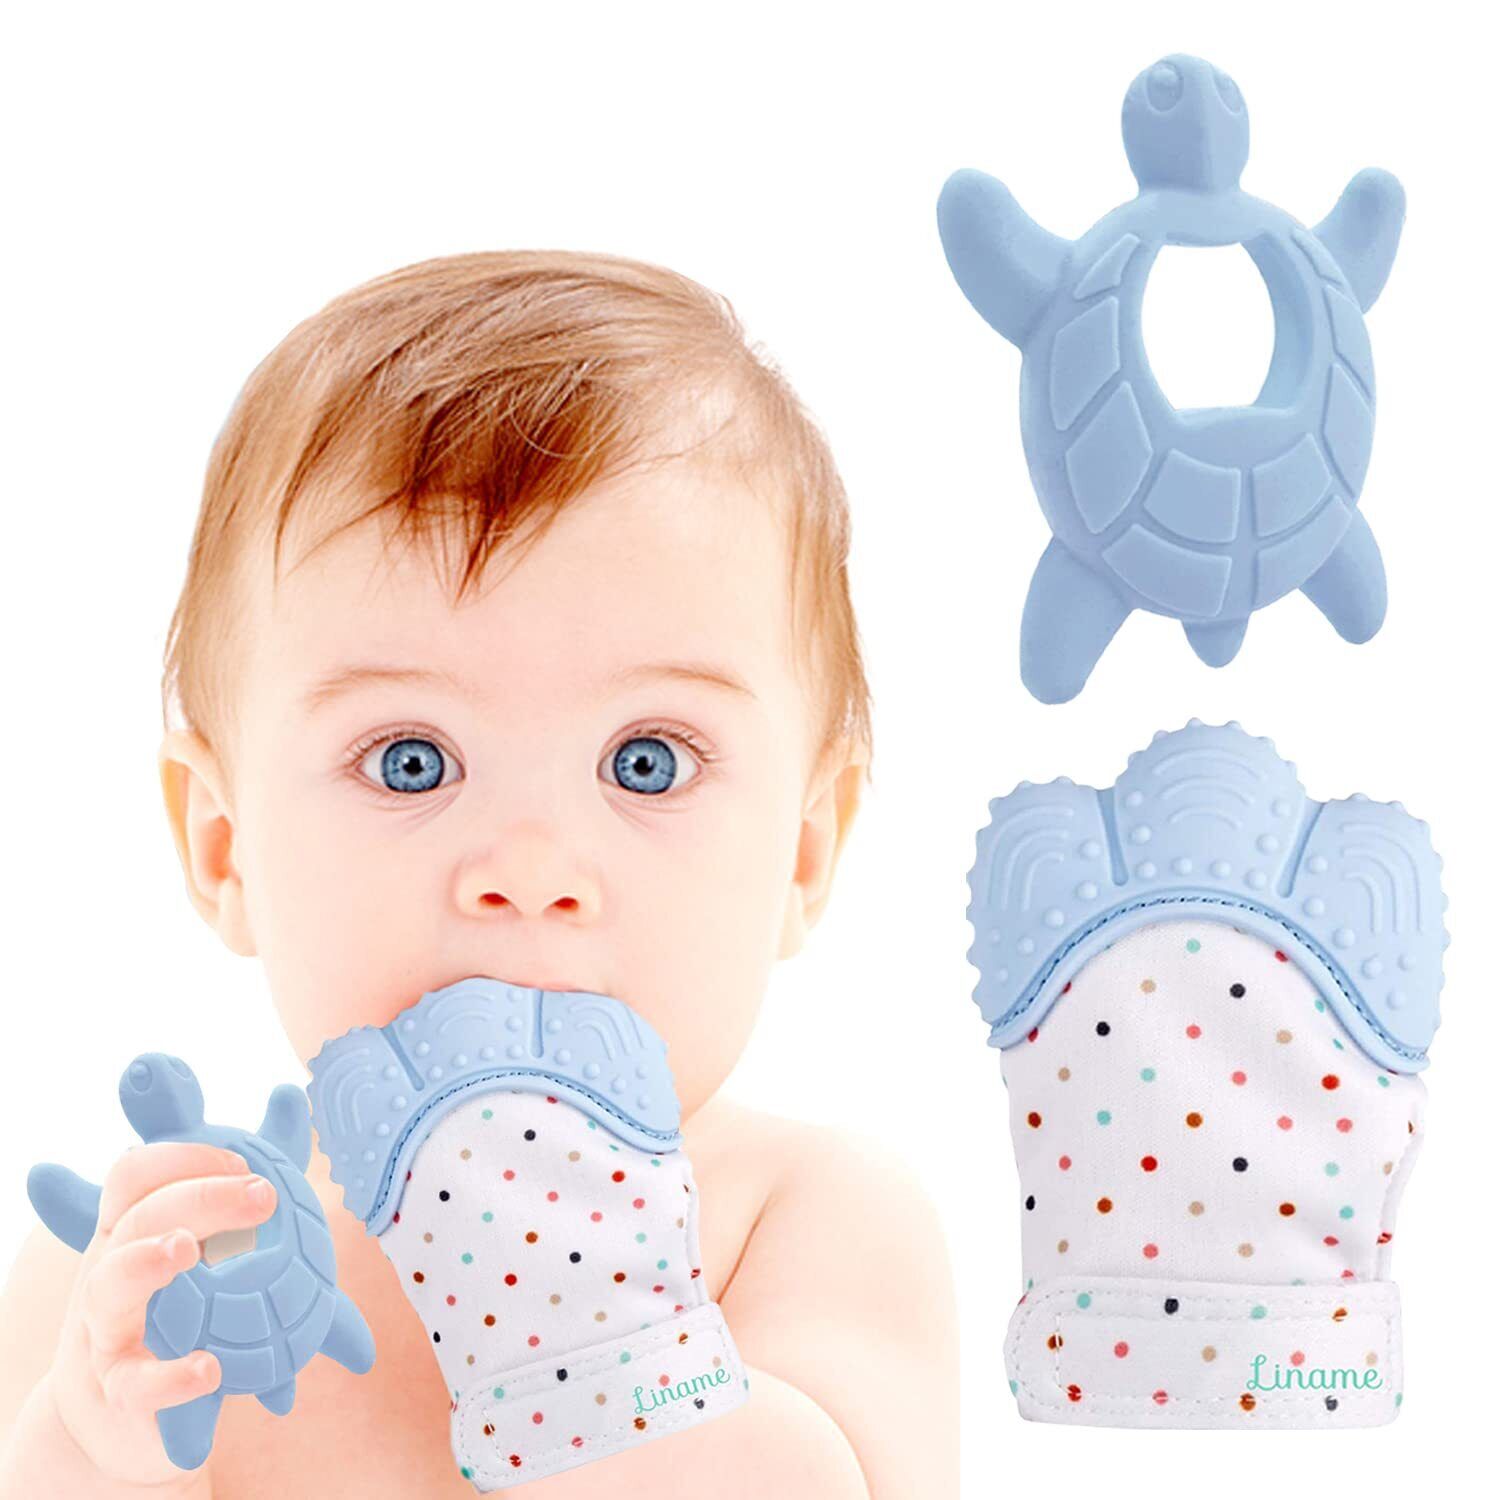 Liname 2 Pack Teething Mitten With Soothing Toy - Baby Chew Toy And Glove Gums